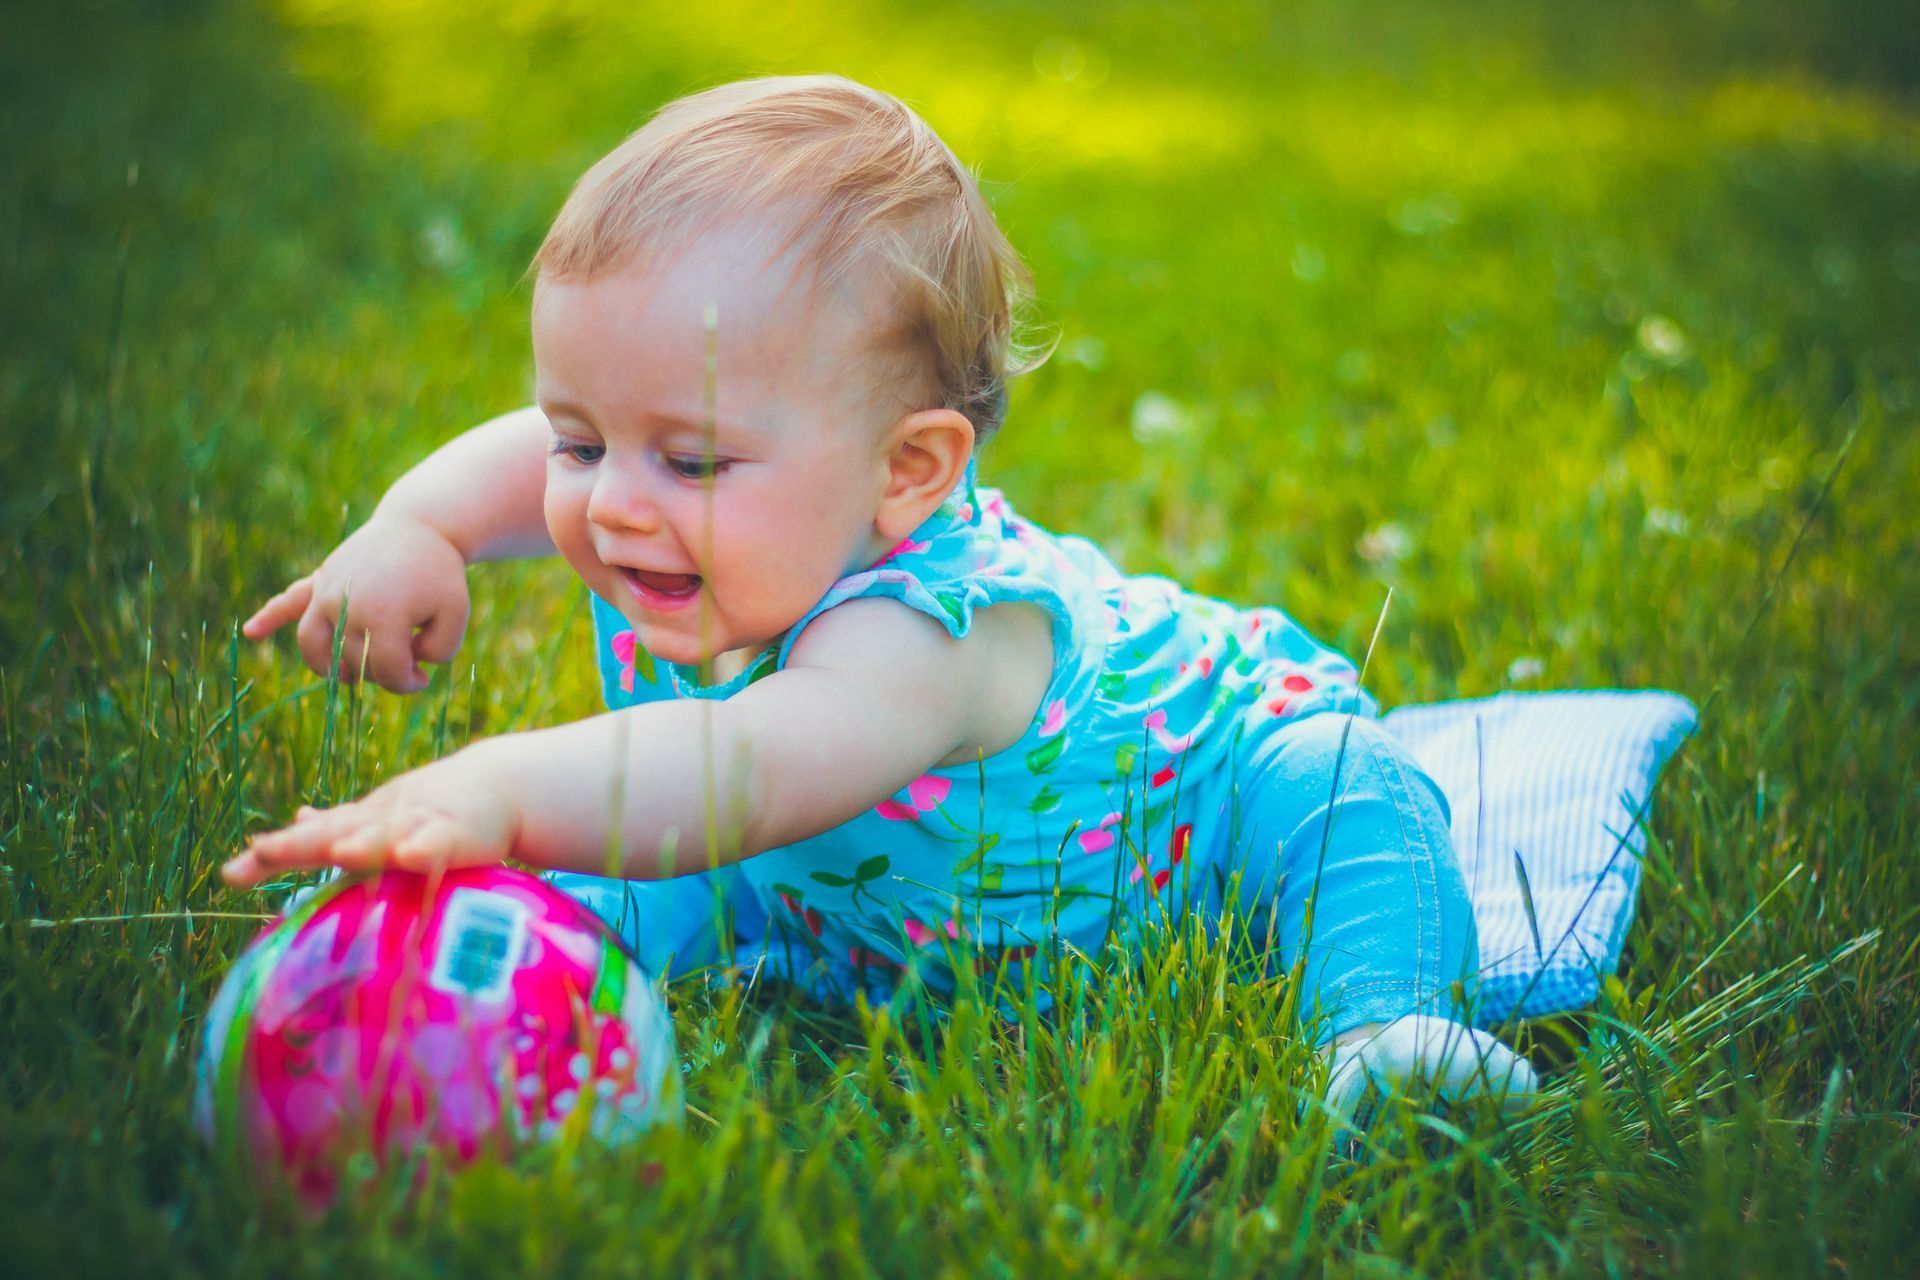 Baby playing with a ball